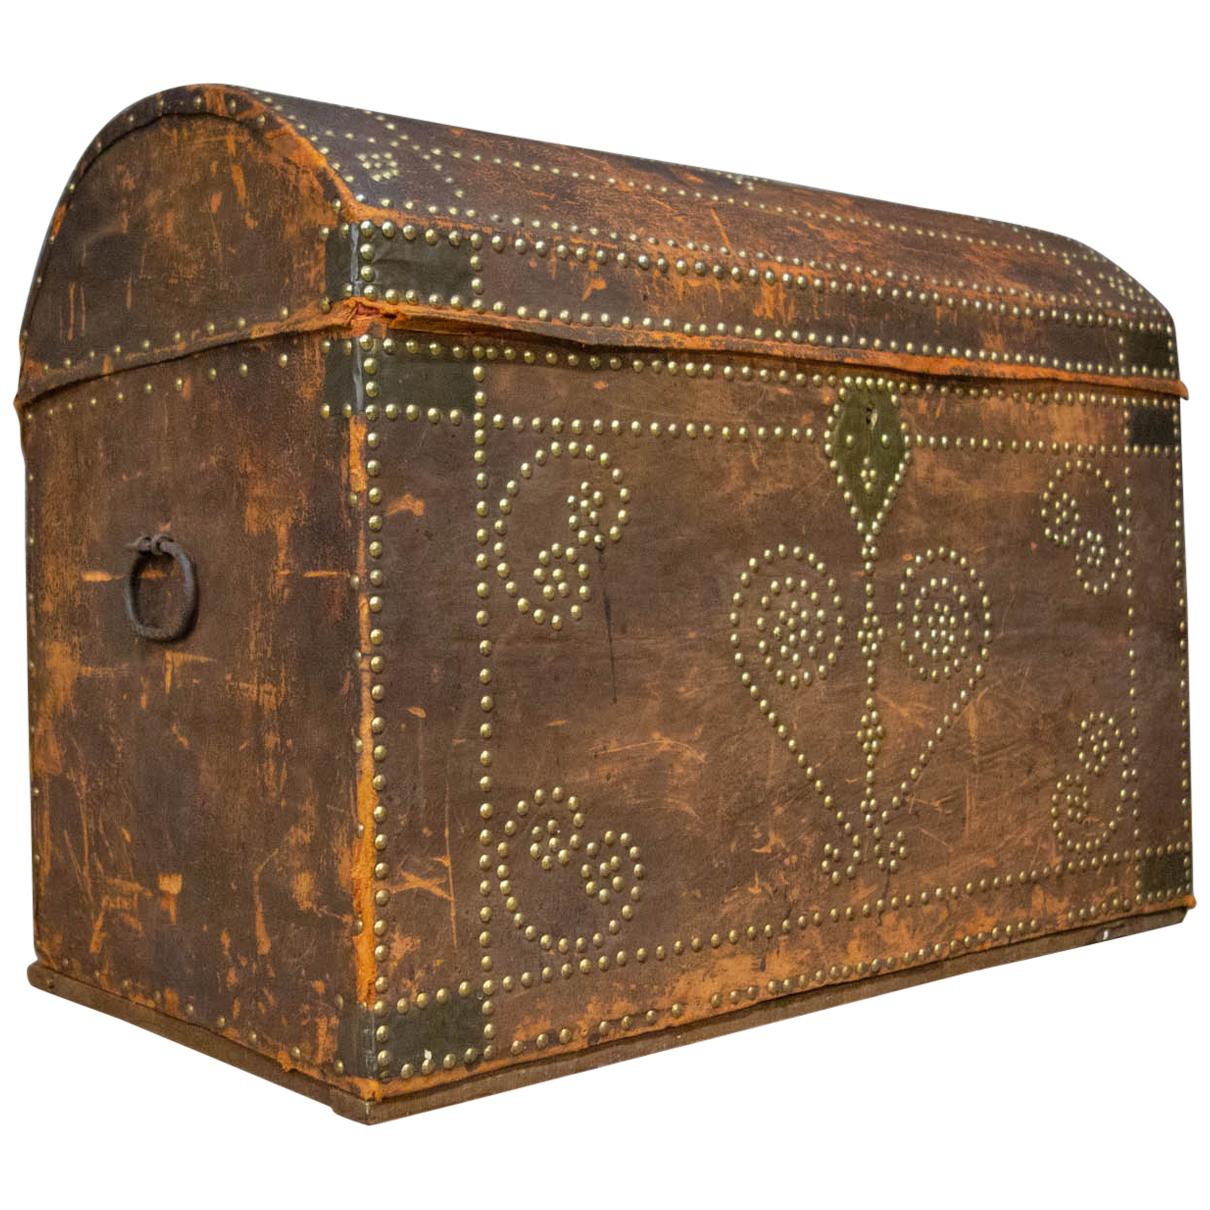 Antique Brown Leather Bridal Box from France, Early 1800 For Sale